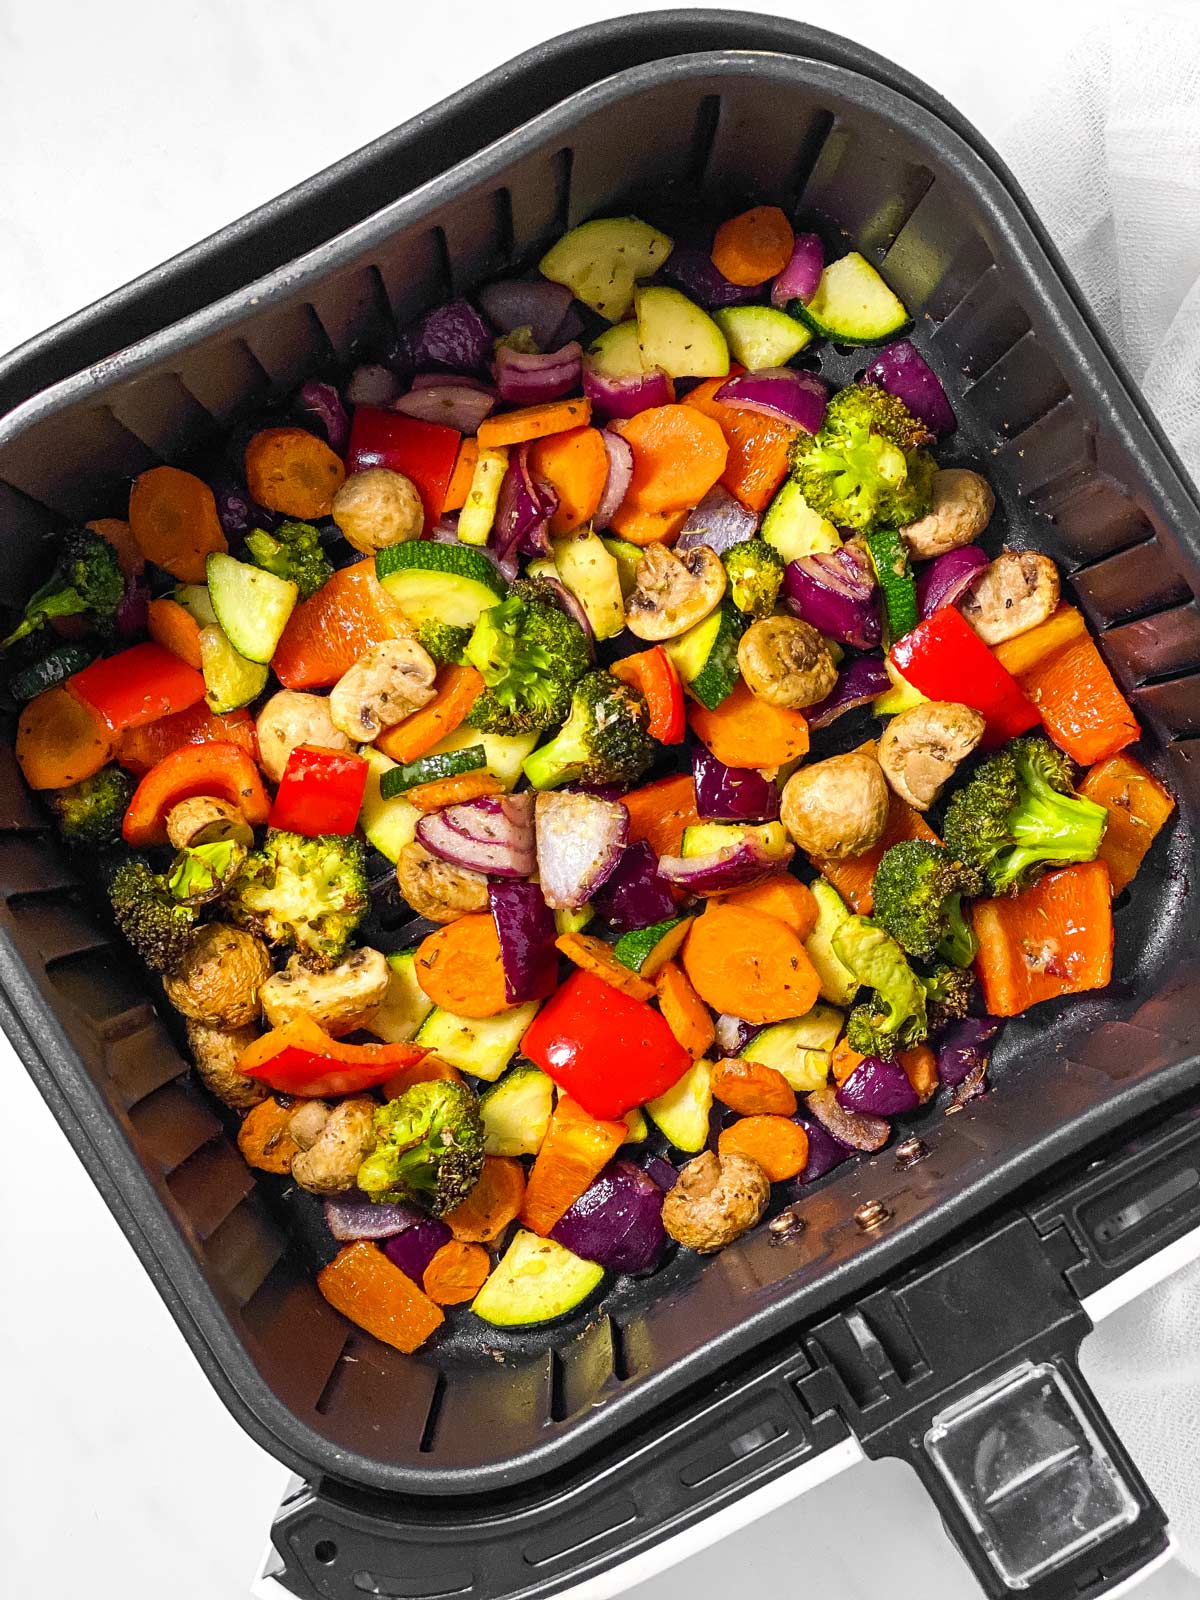 overhead view of air fryer basket filled with roasted vegetables